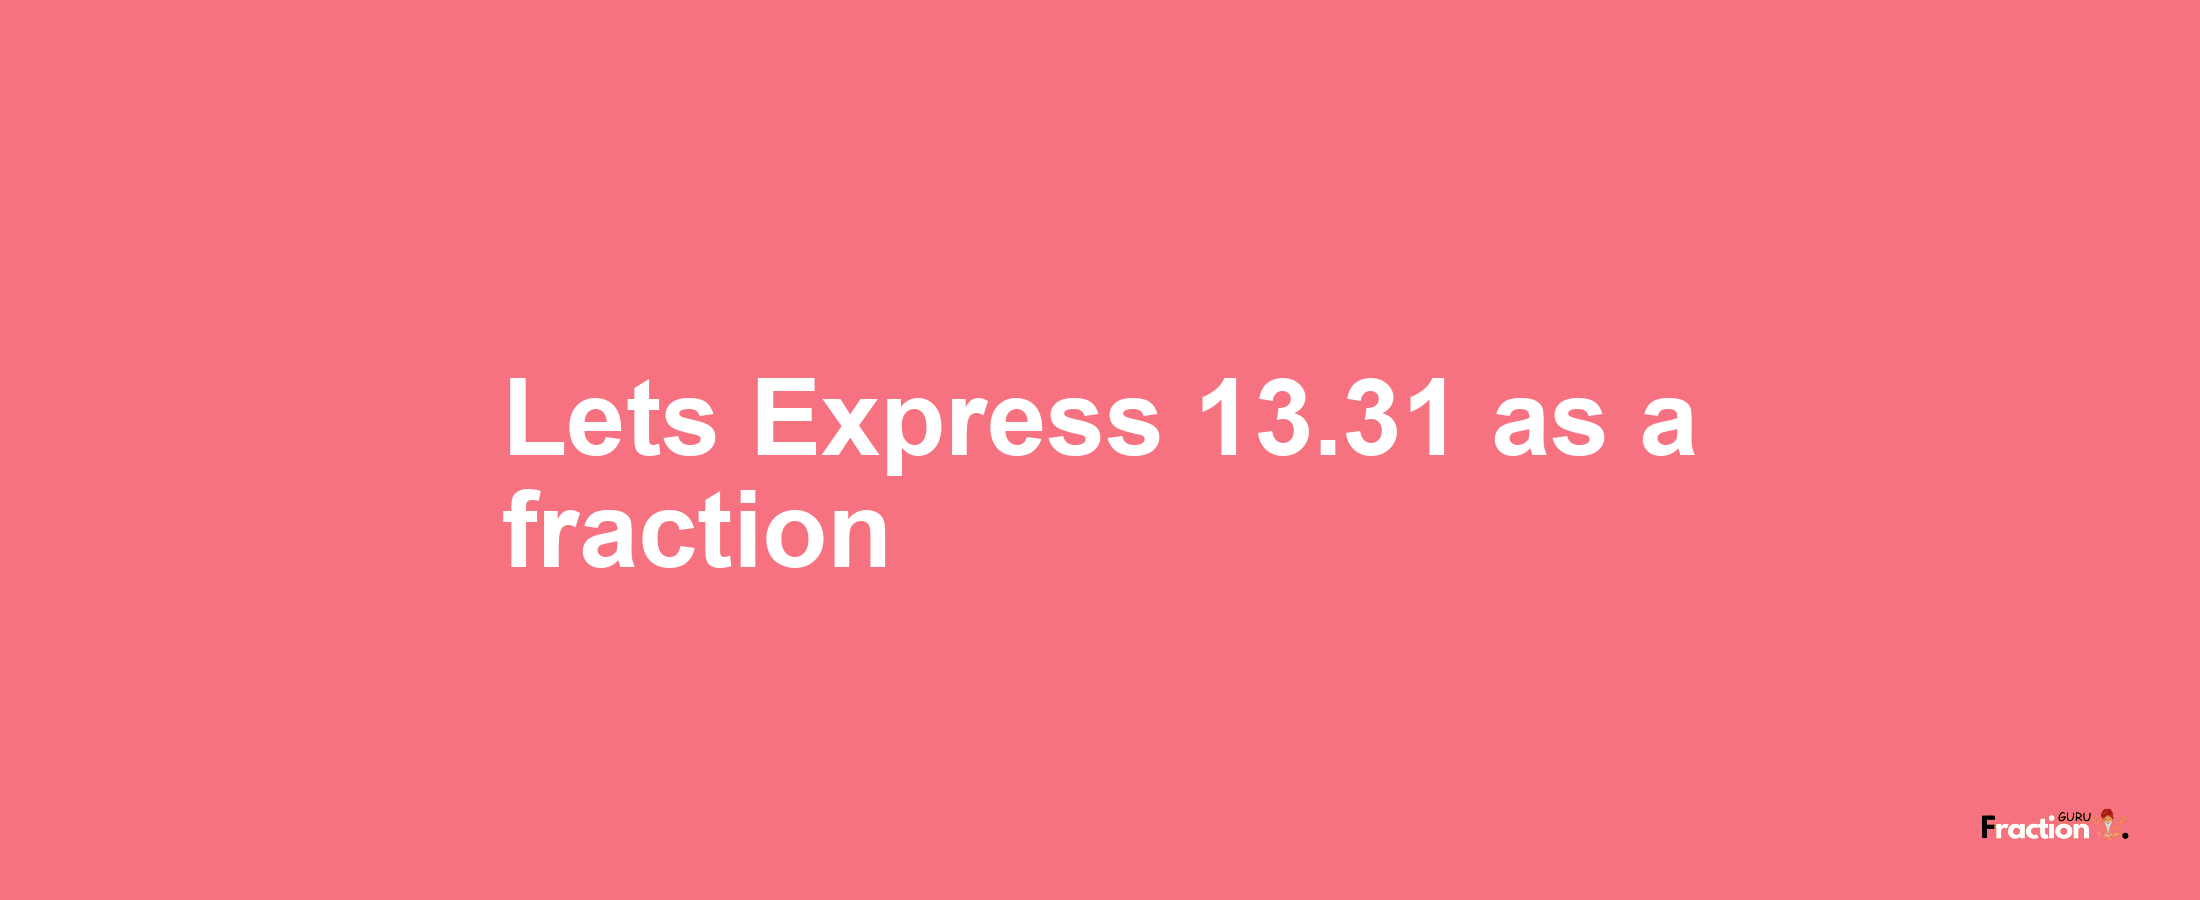 Lets Express 13.31 as afraction